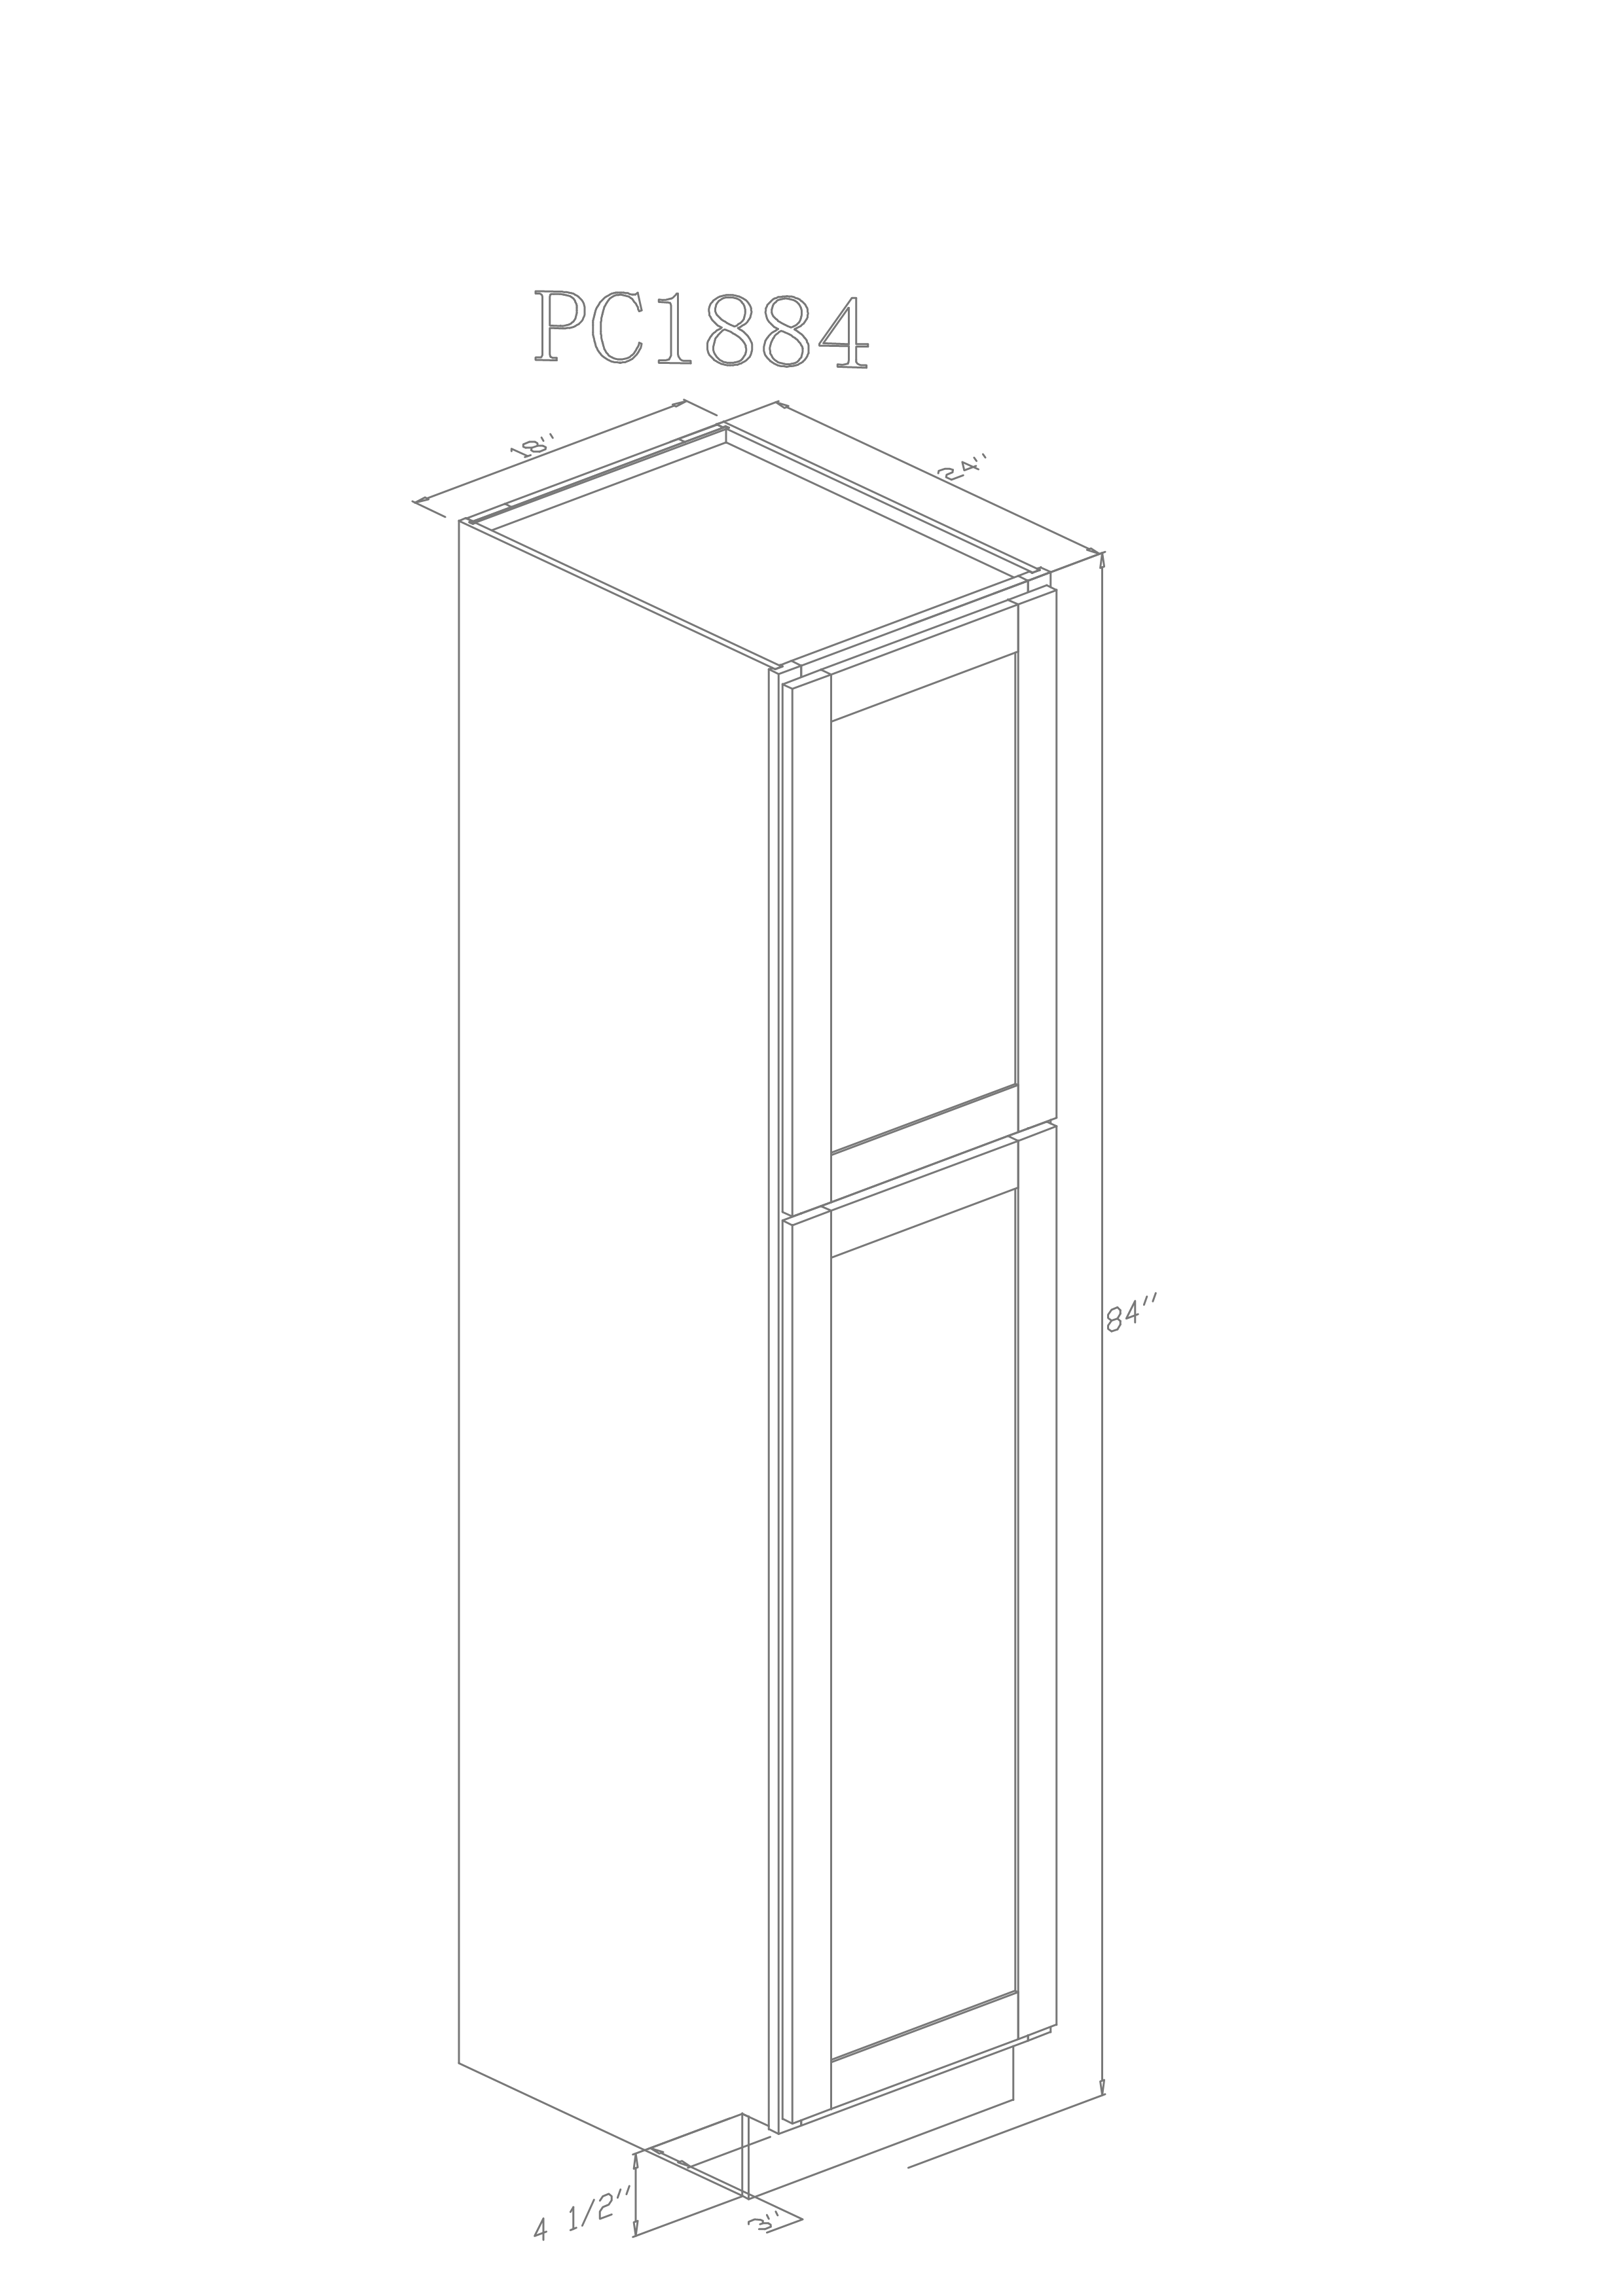 Tall 18" - Athens 18 Inch Pantry Cabinet - ZCBuildingSupply